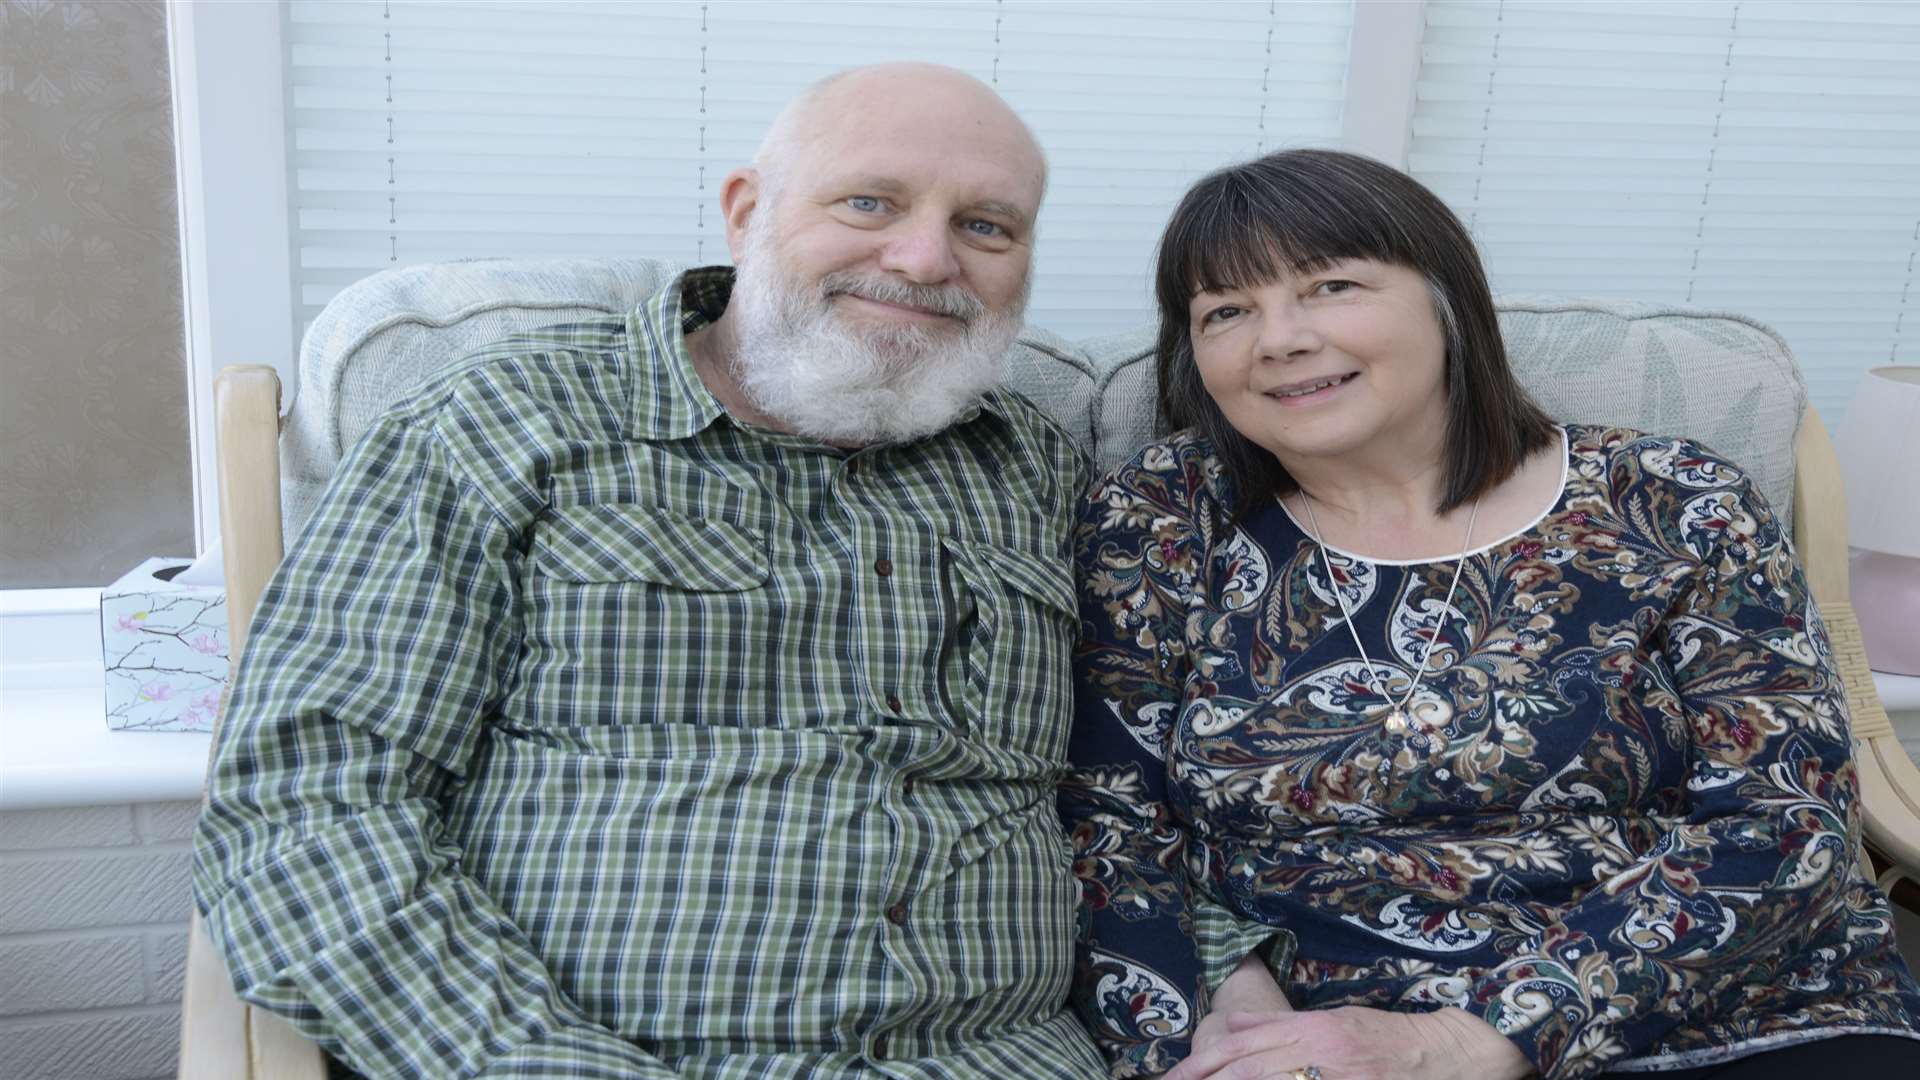 Kevin O'Brien and wife Sue can't praise the NHS enough after he nearly died